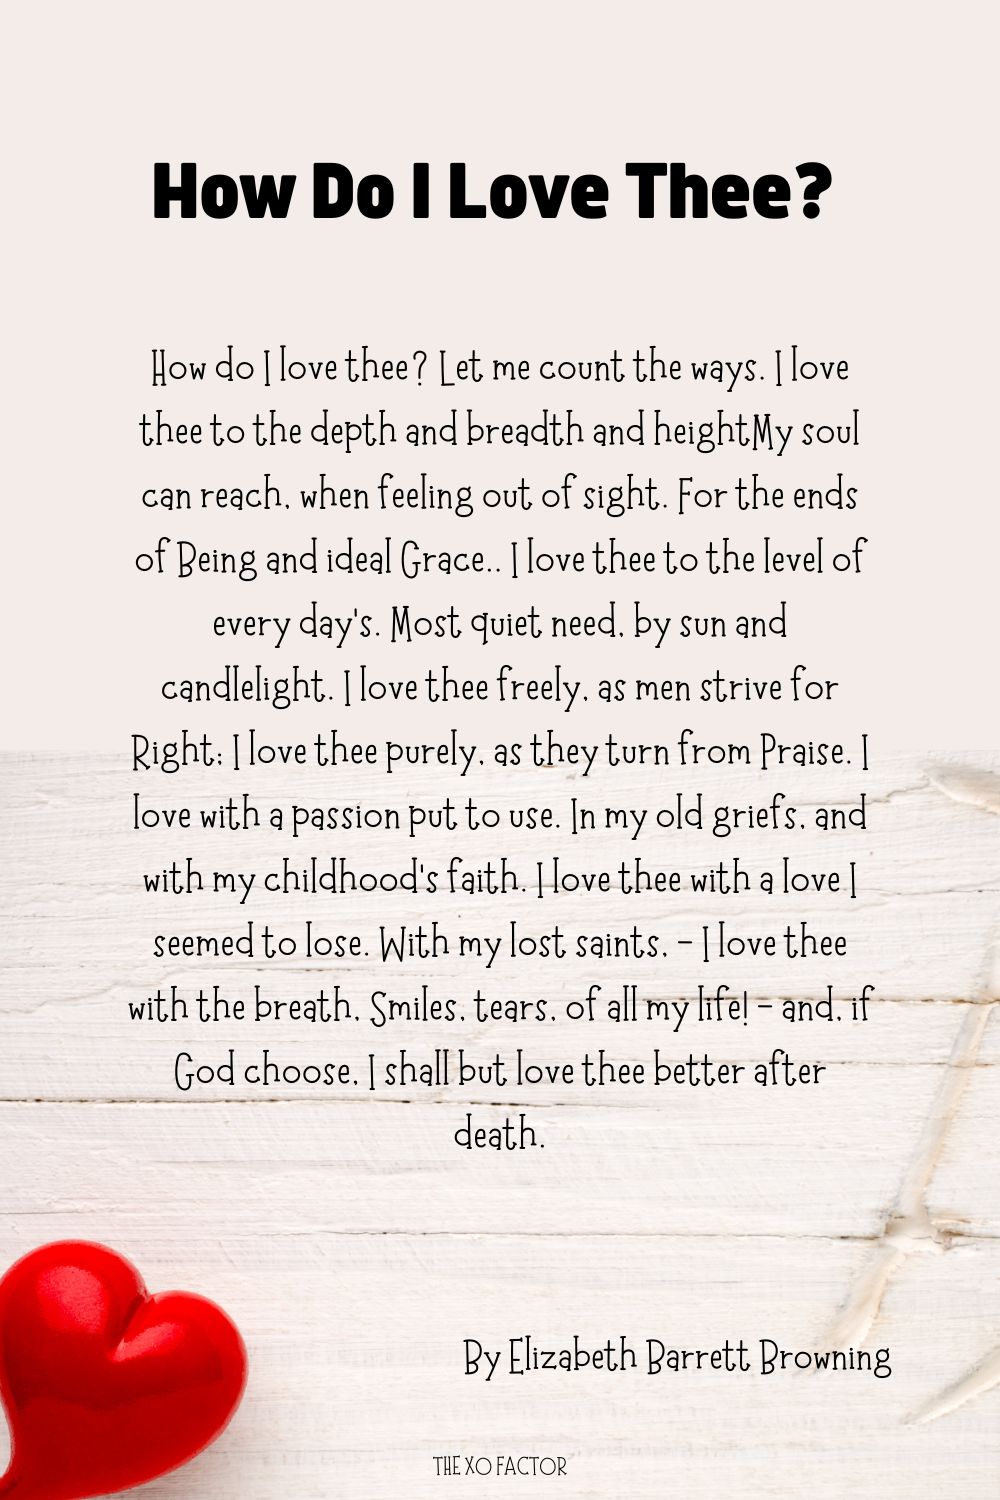 How Do I Love Thee? By Elizabeth Barrett Browning